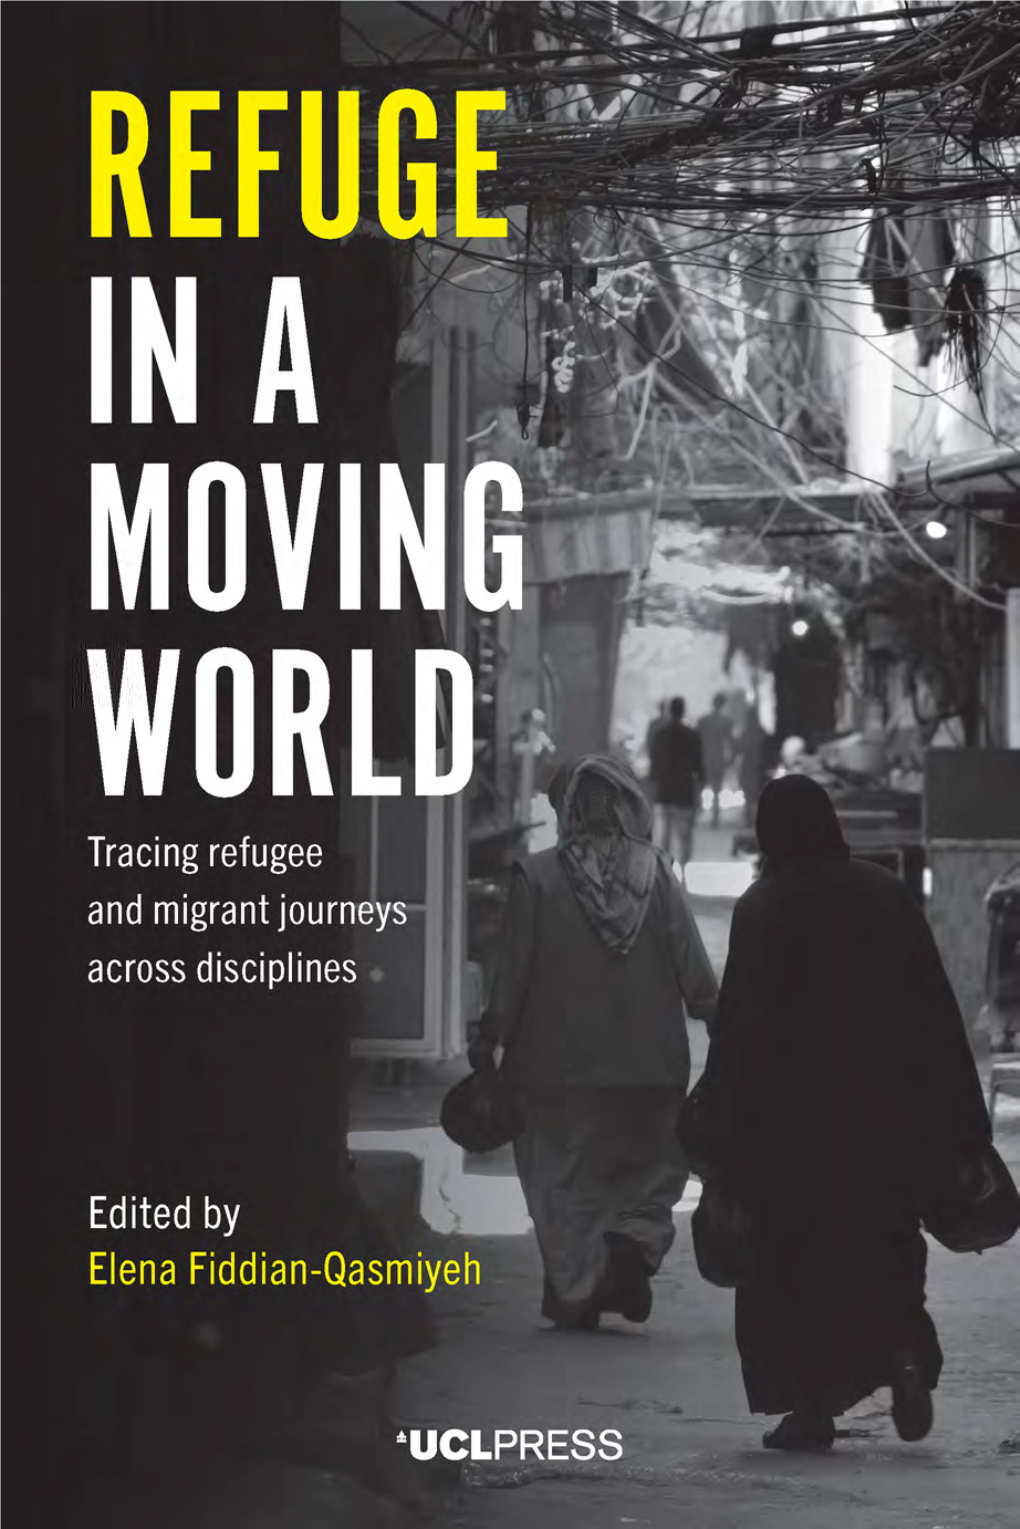 Tracing Refugee and Migrant Journeys Across Disciplines